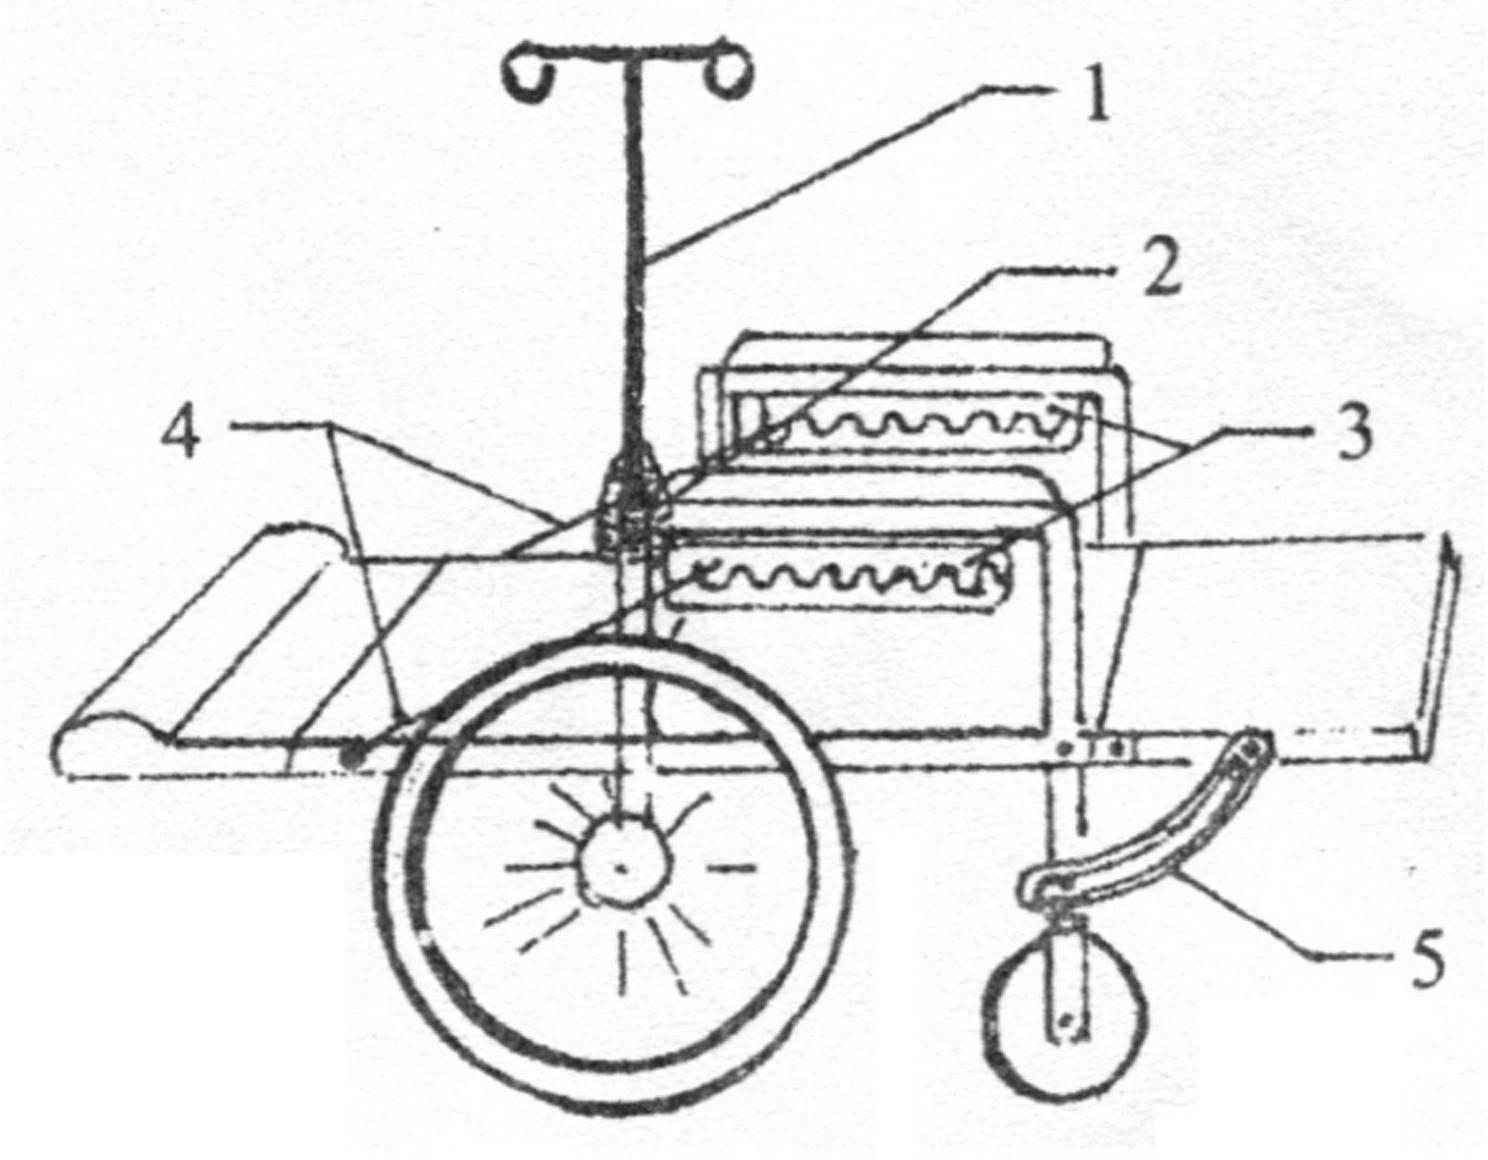 Wheelchair provided with transfusion frame and cane for walking and added with lying function